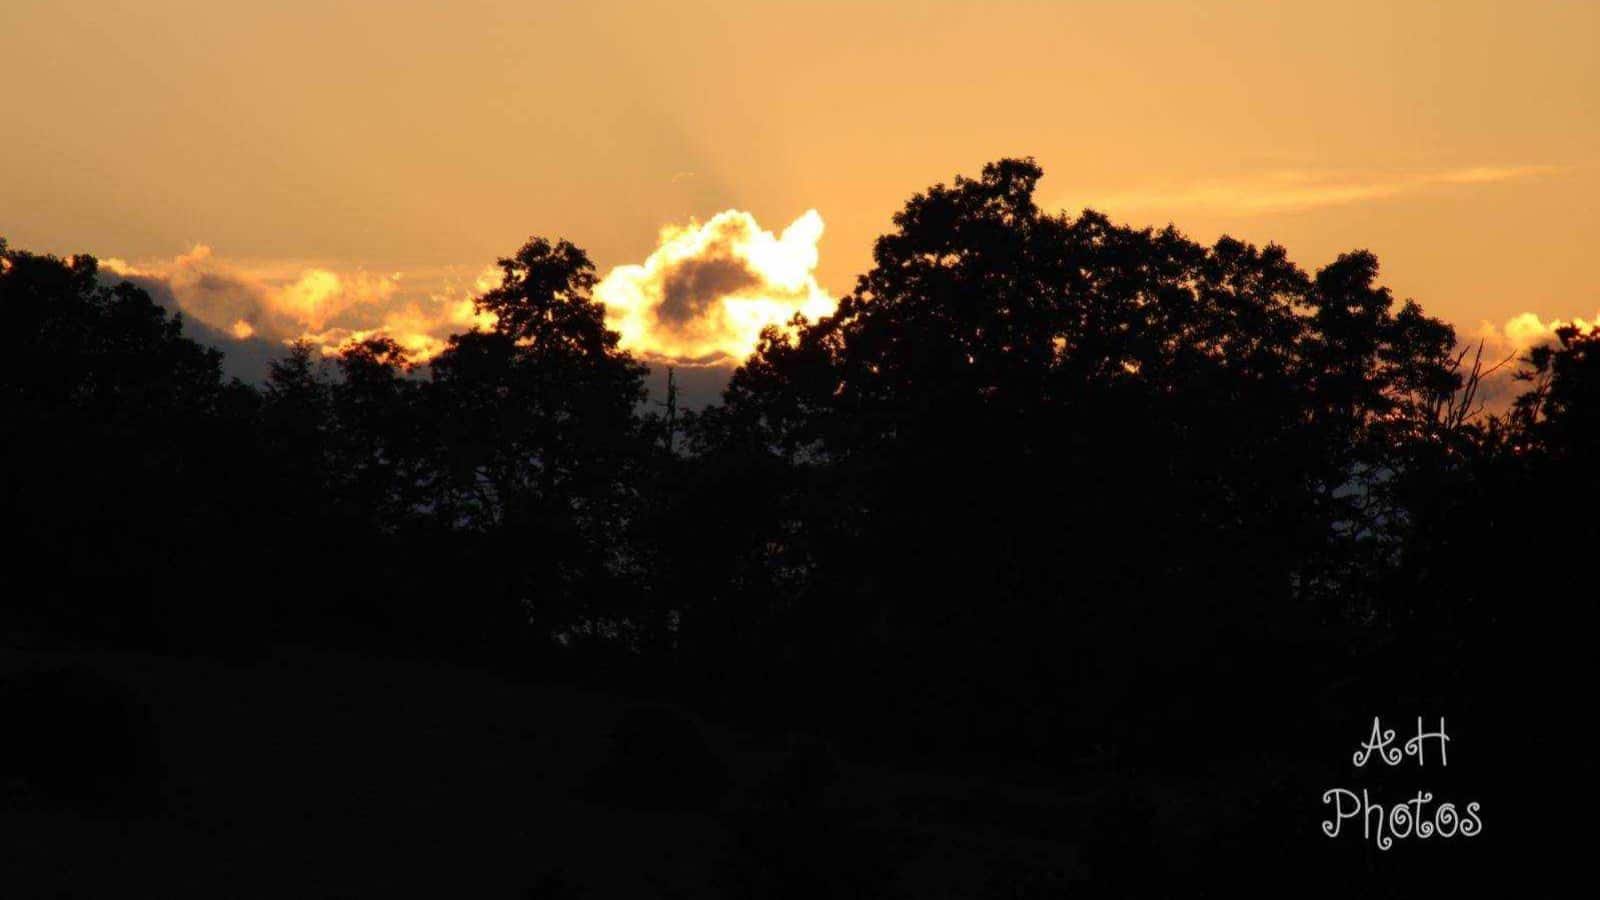 Silhouettes of large trees with setting sun behind a cloud in the background